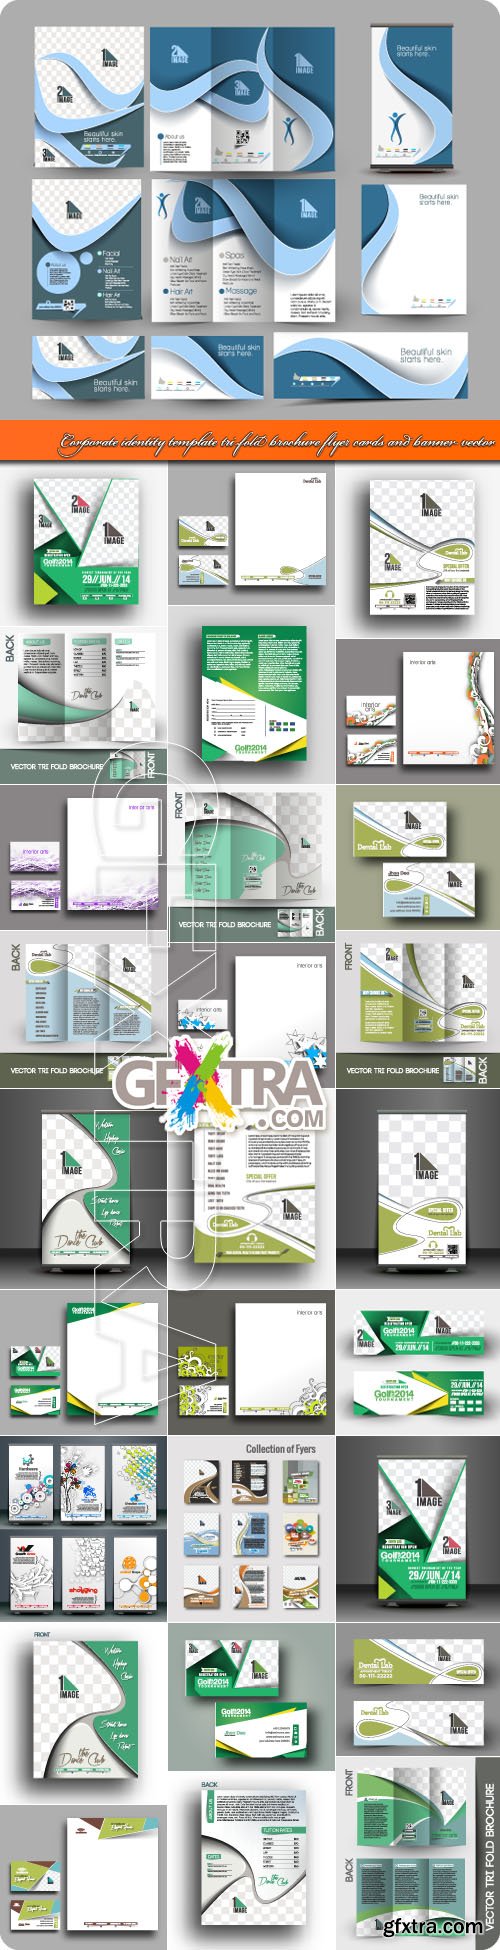 Corporate identity template tri-fold brochure flyer cards and banner vector